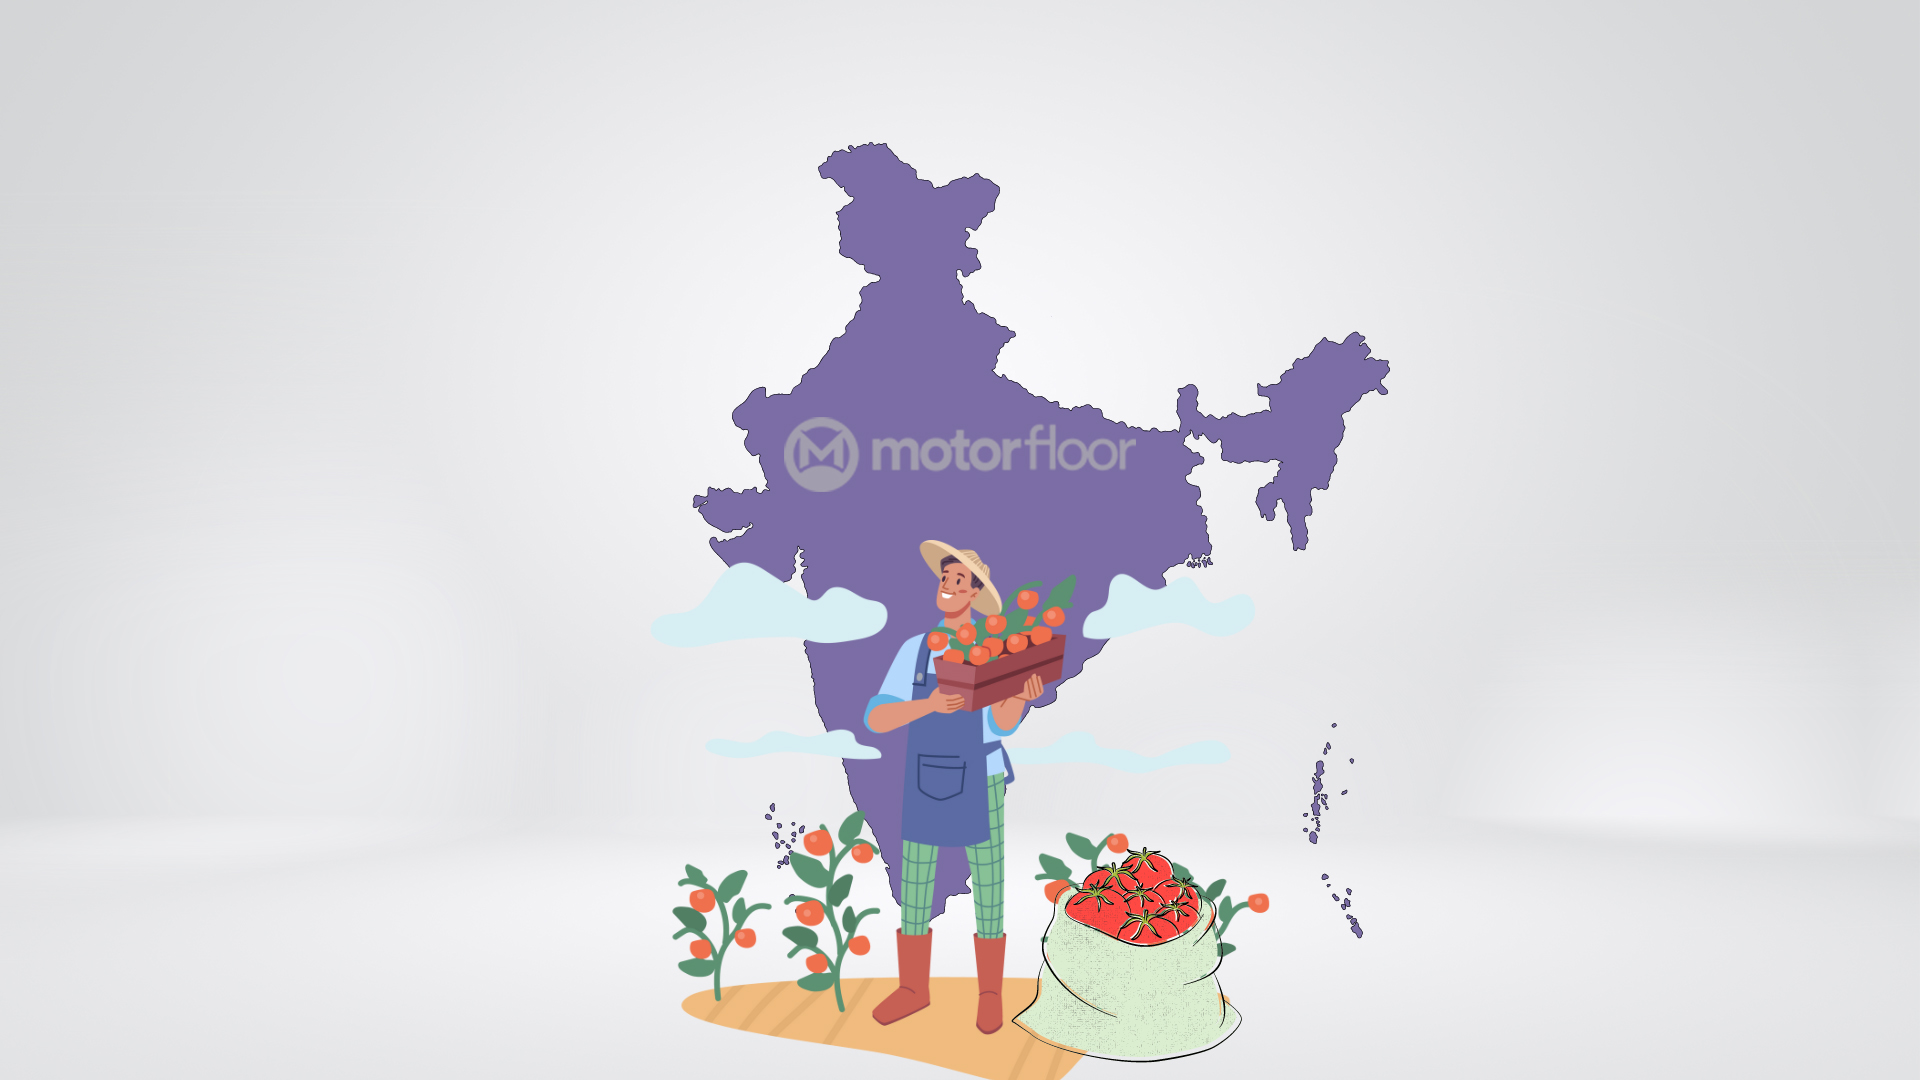 Tomato Producing States in India